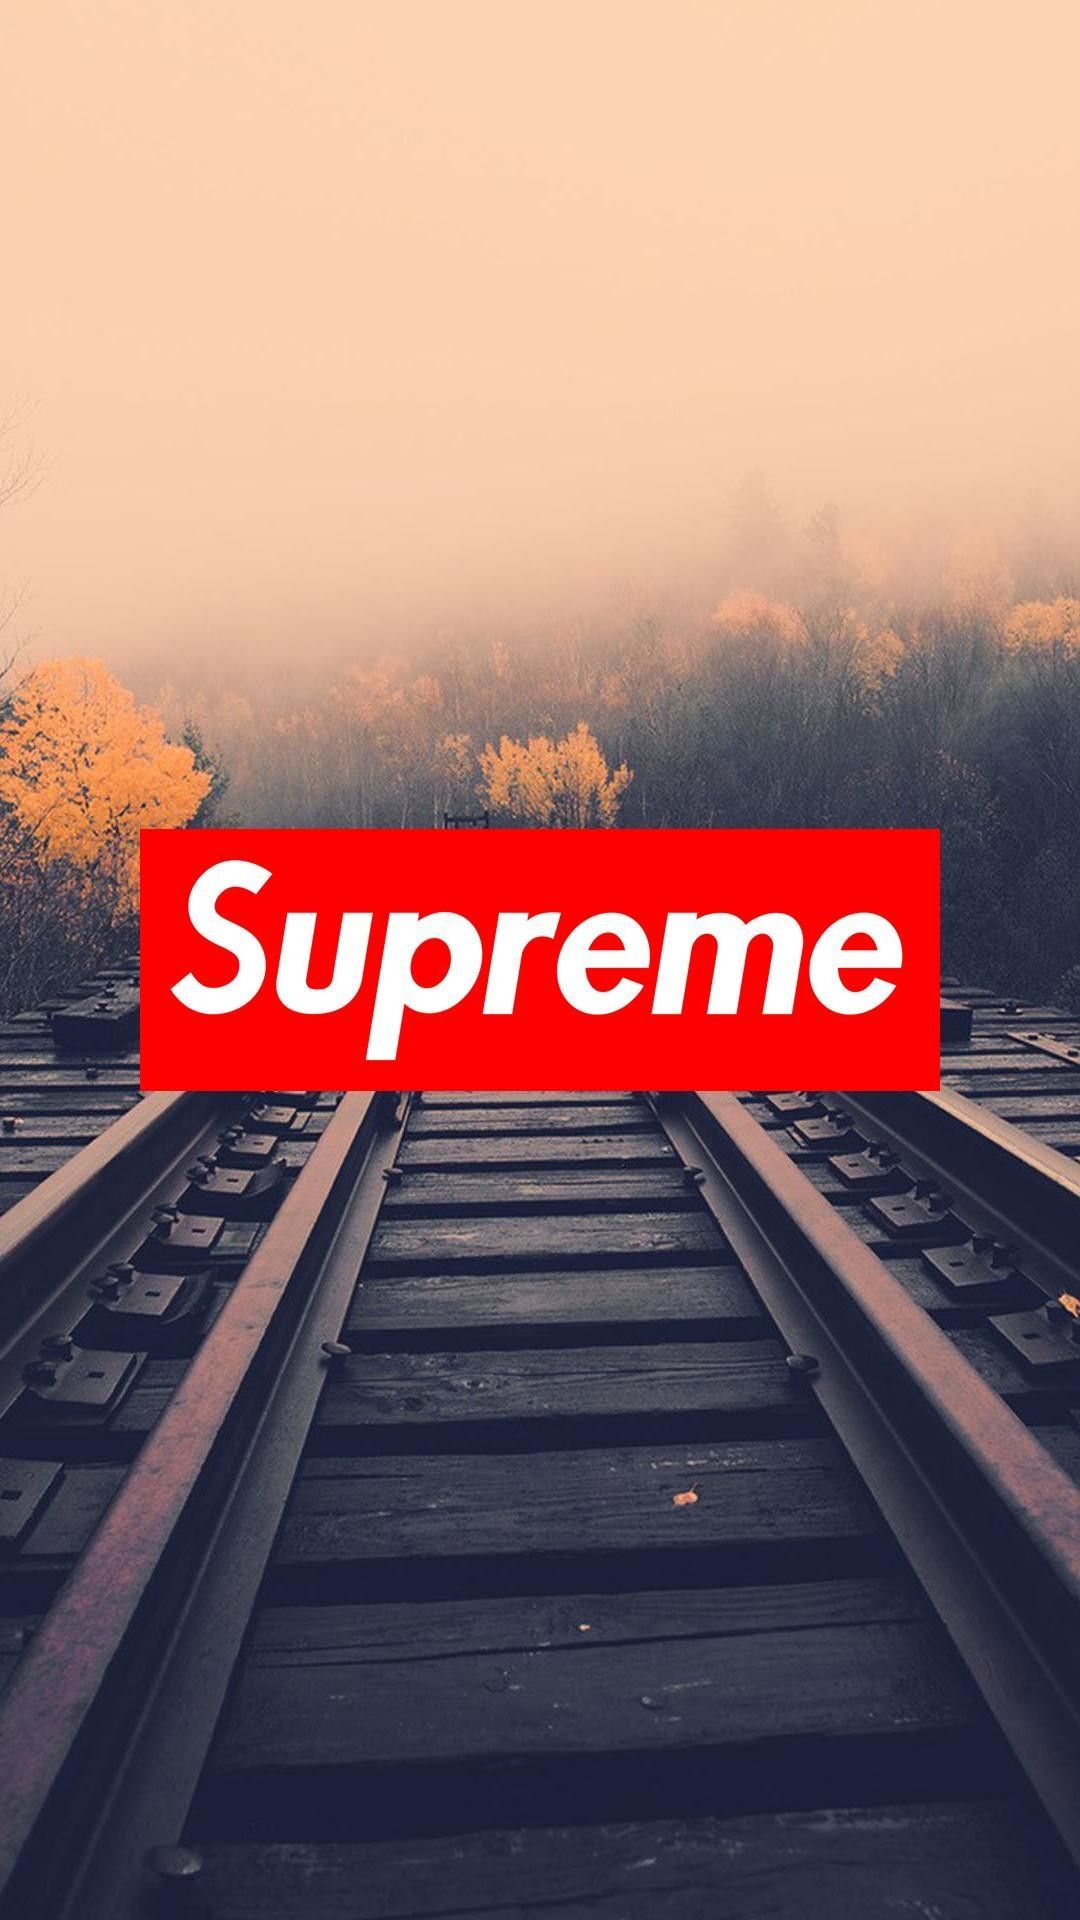 Free download Supreme Wallpaper 73 images [1280x1920] for your